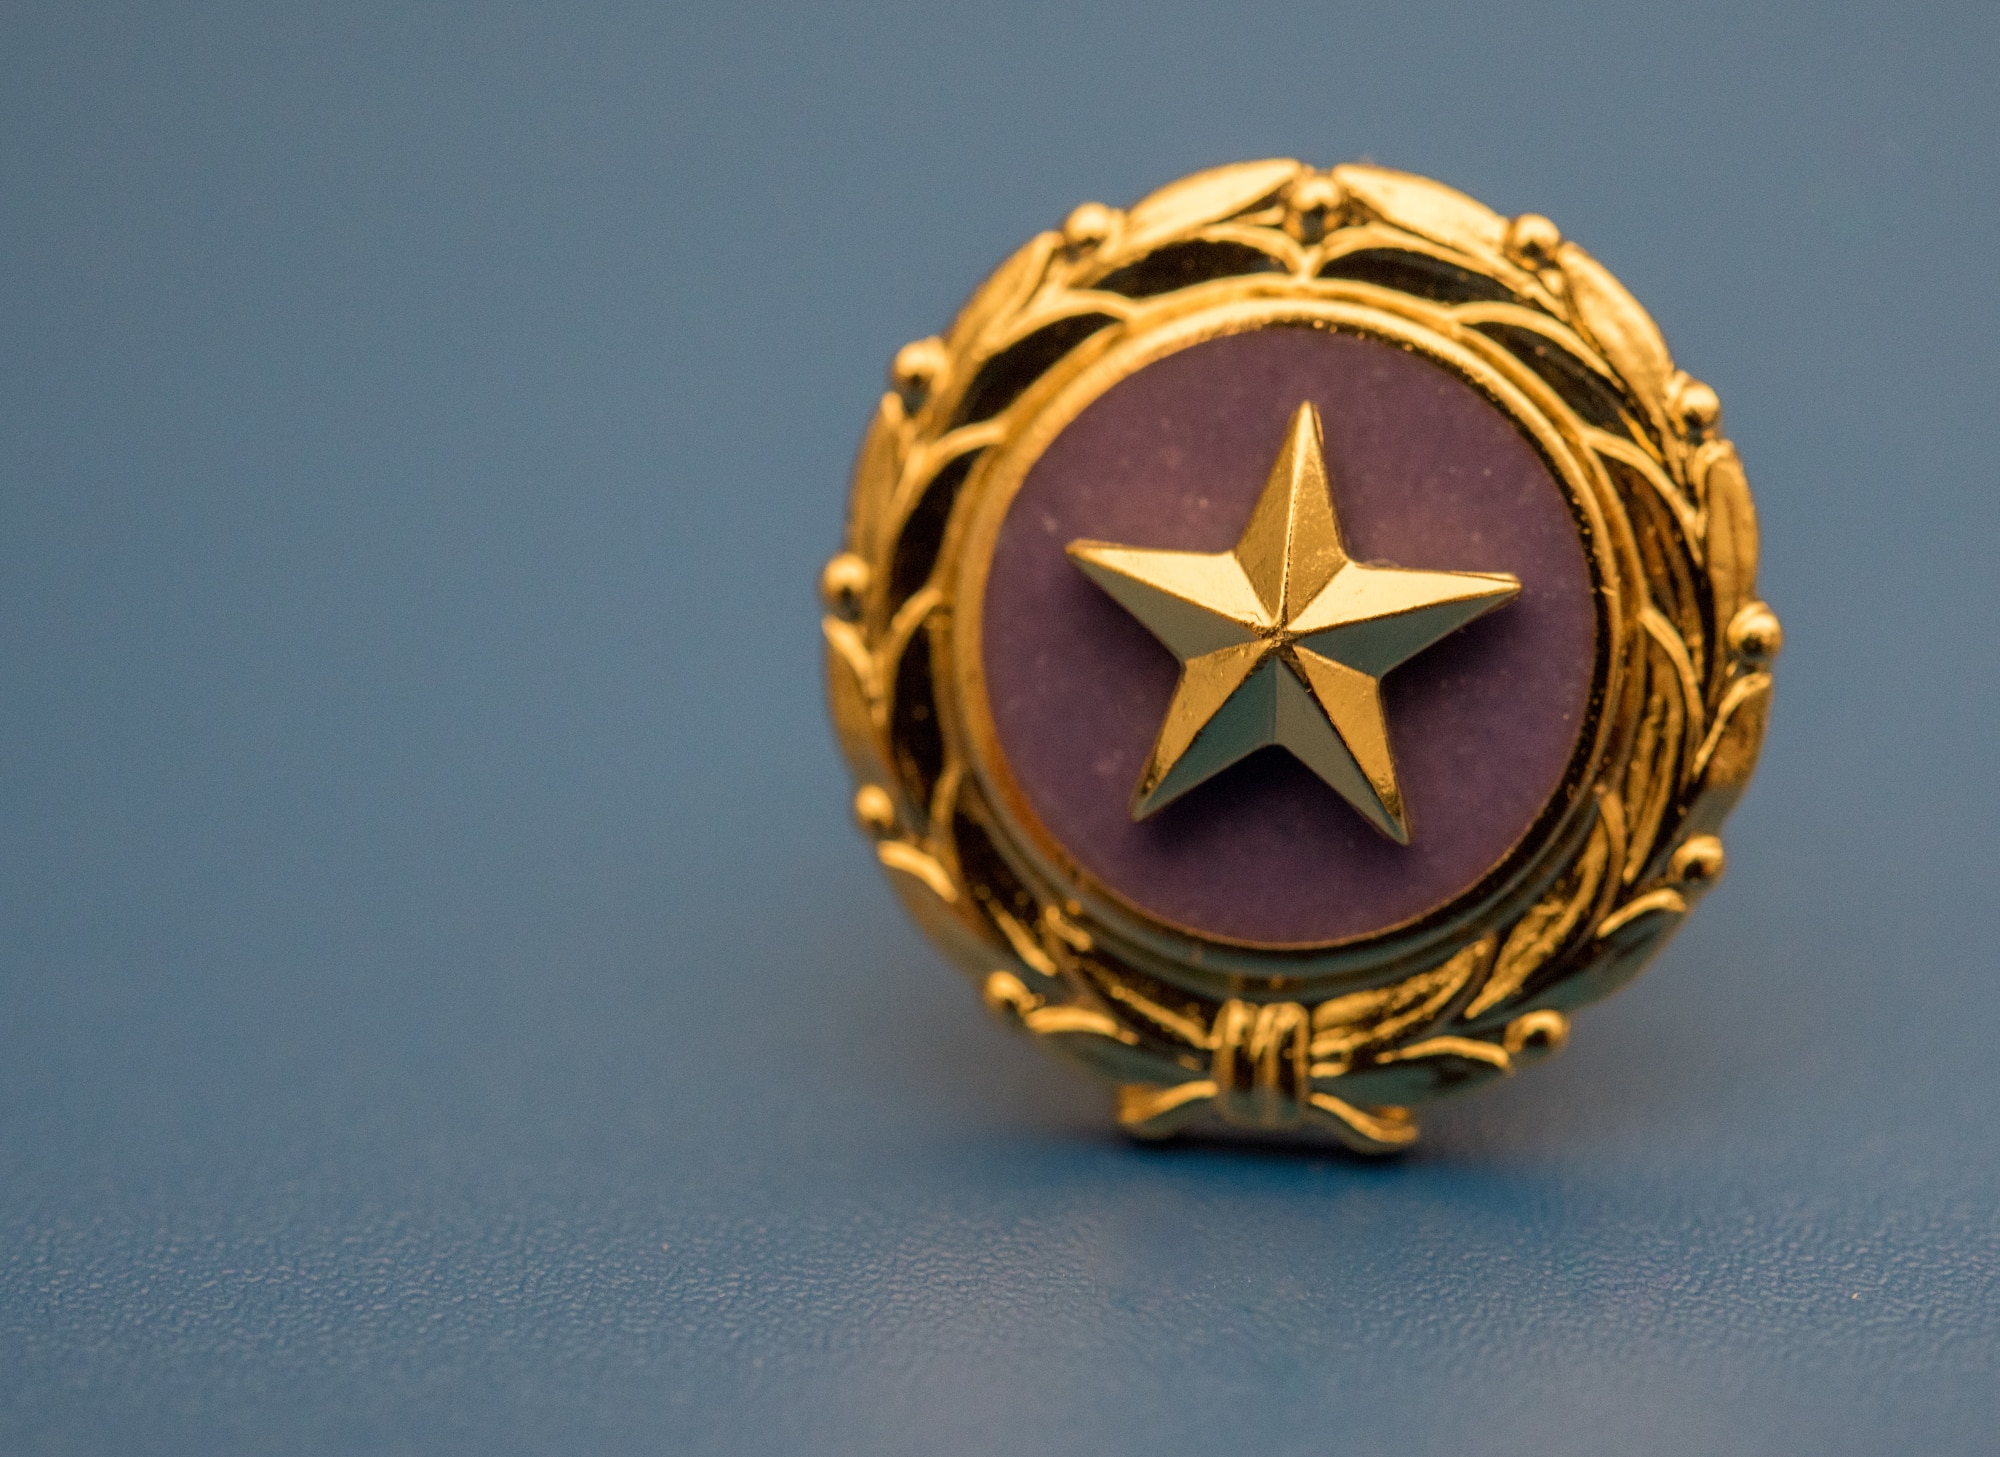 The Gold Star Family Member lapel pin was presented to U.S. Navy Commander Kerry Beasley at Joint Base Langley-Eustis, Virginia, Jan. 9, 2019 by 633rd Air Base Wing Commander, Colonel Sean K. Tyler.